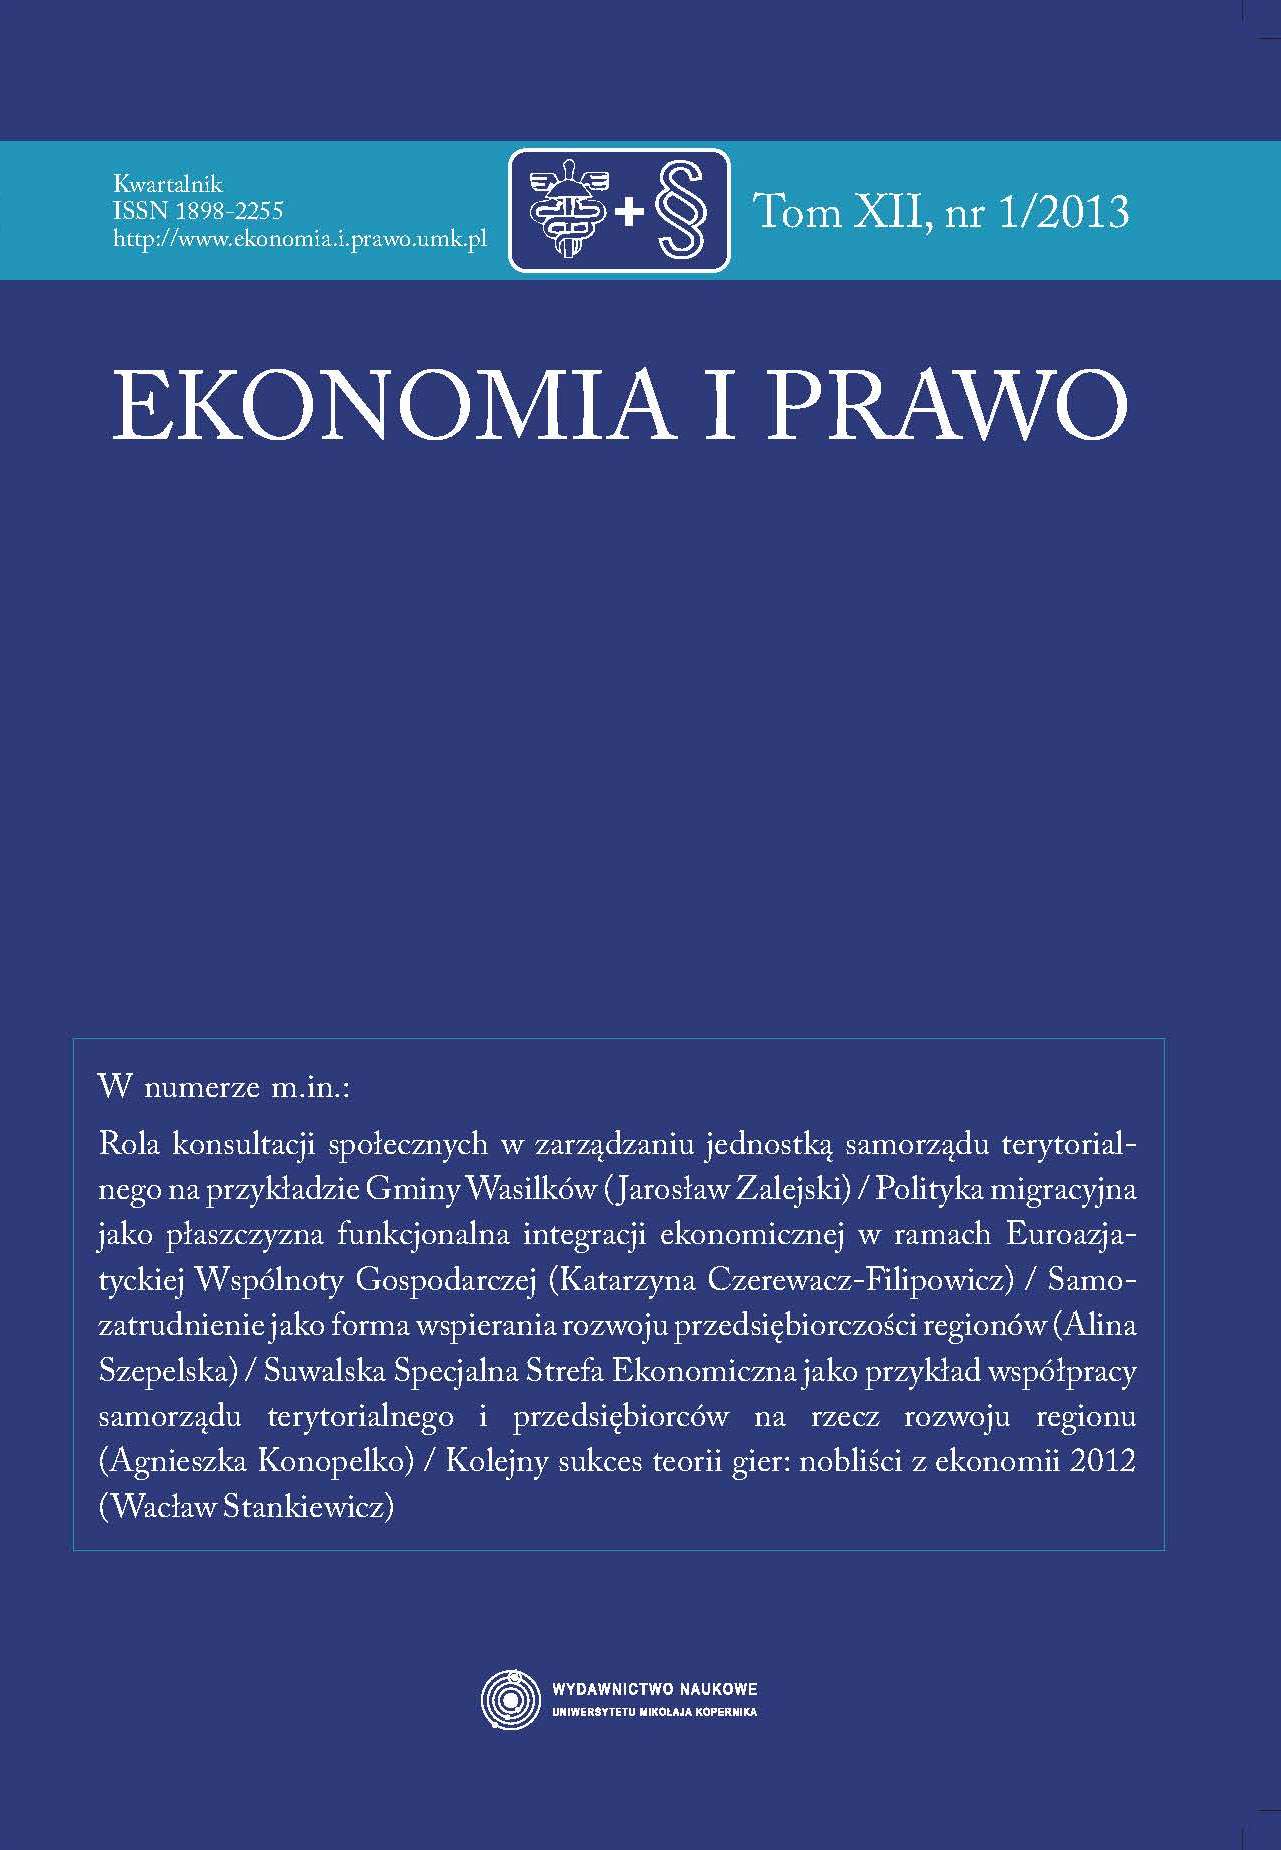 LOCAL AND ECONOMIC GOVERNMENT AS THE DETERMINANT OF INNOVATION AND ECONOMIC CONDITION: CASE STUDY OF SWEDISH ECONOMY Cover Image